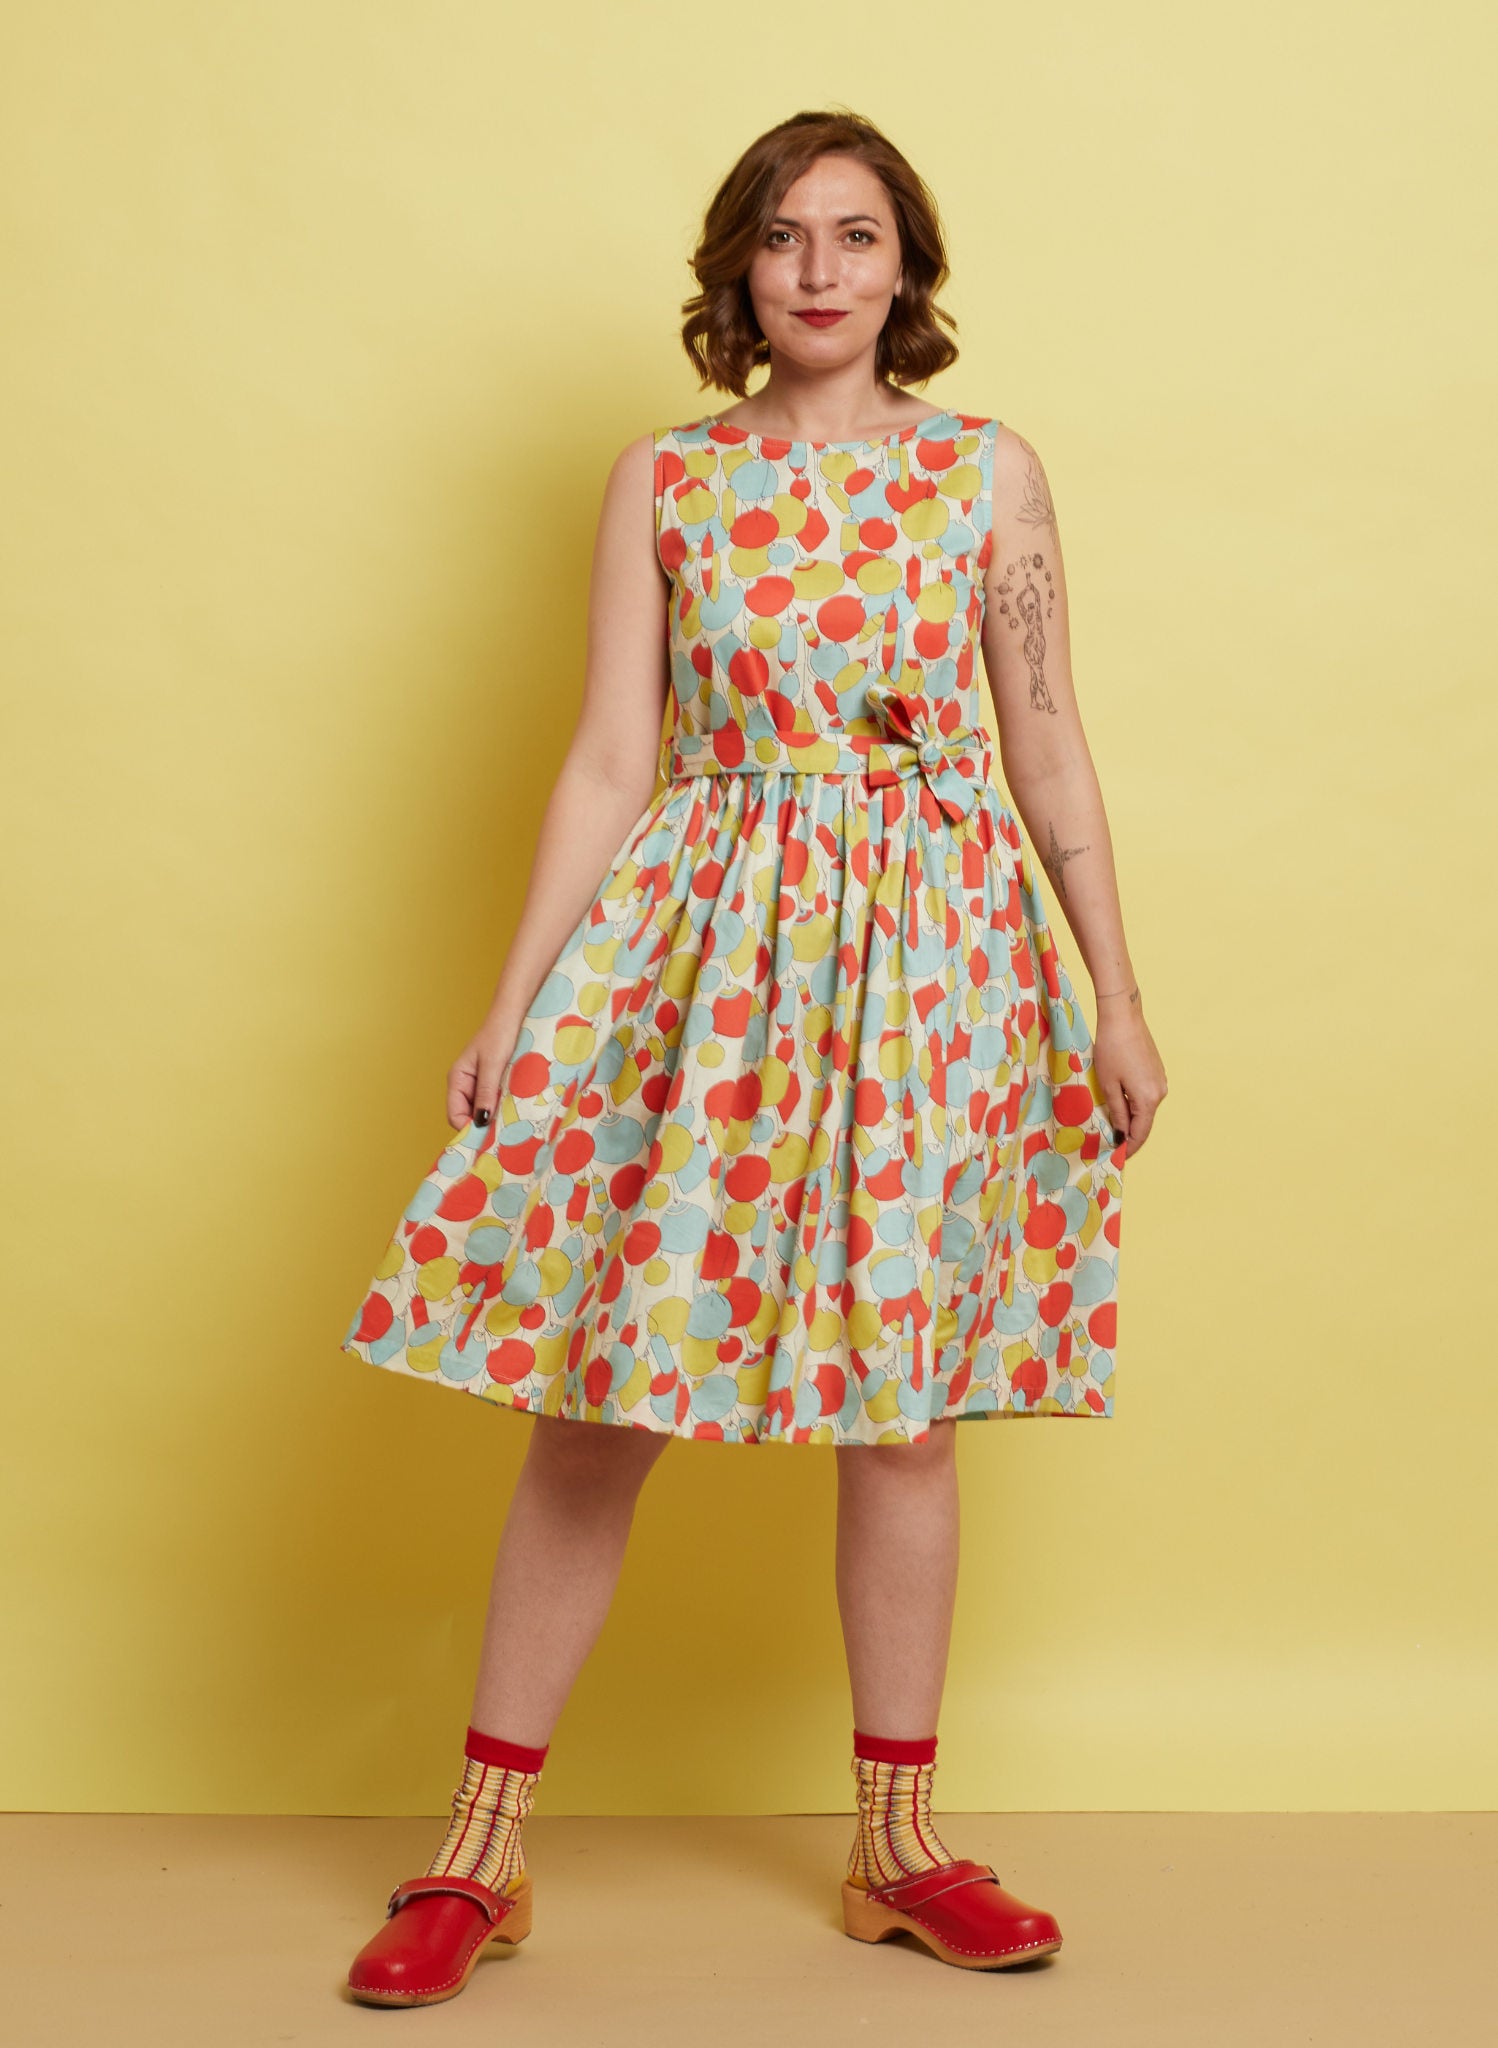 Colourful Buoys Dress | 100% Organic Cotton | Made in UK